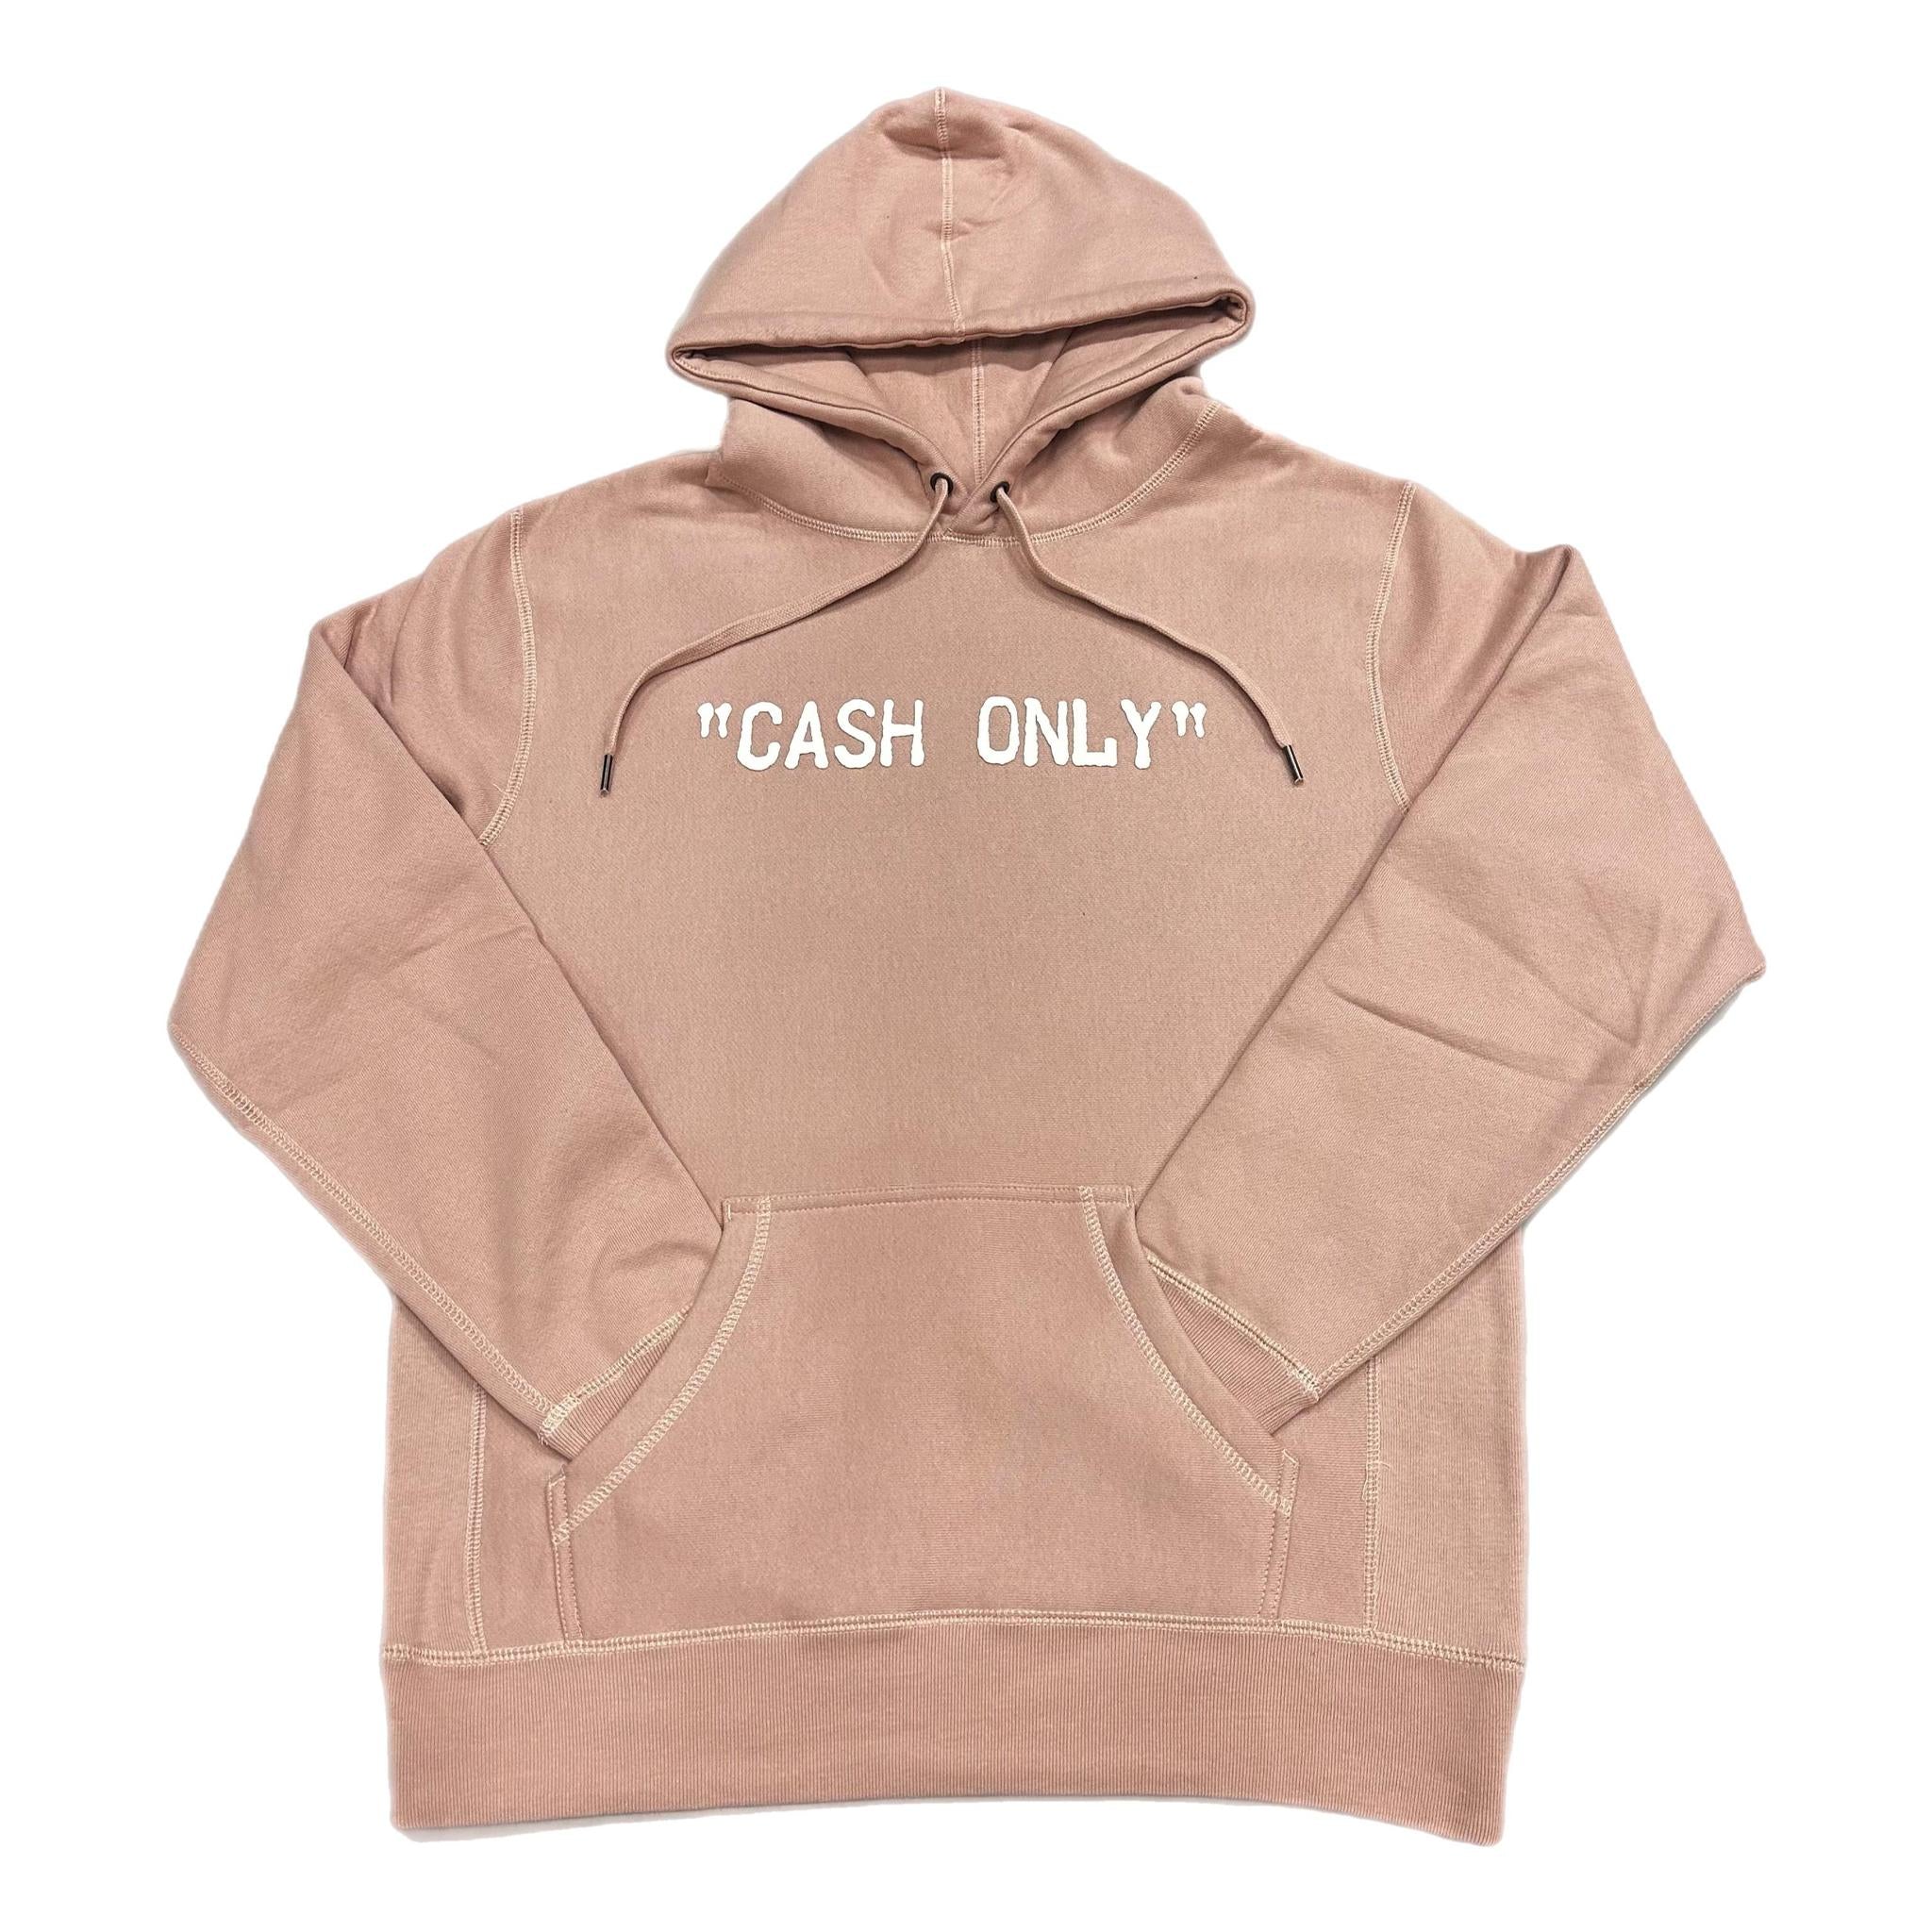 Cash Only (H) P/W